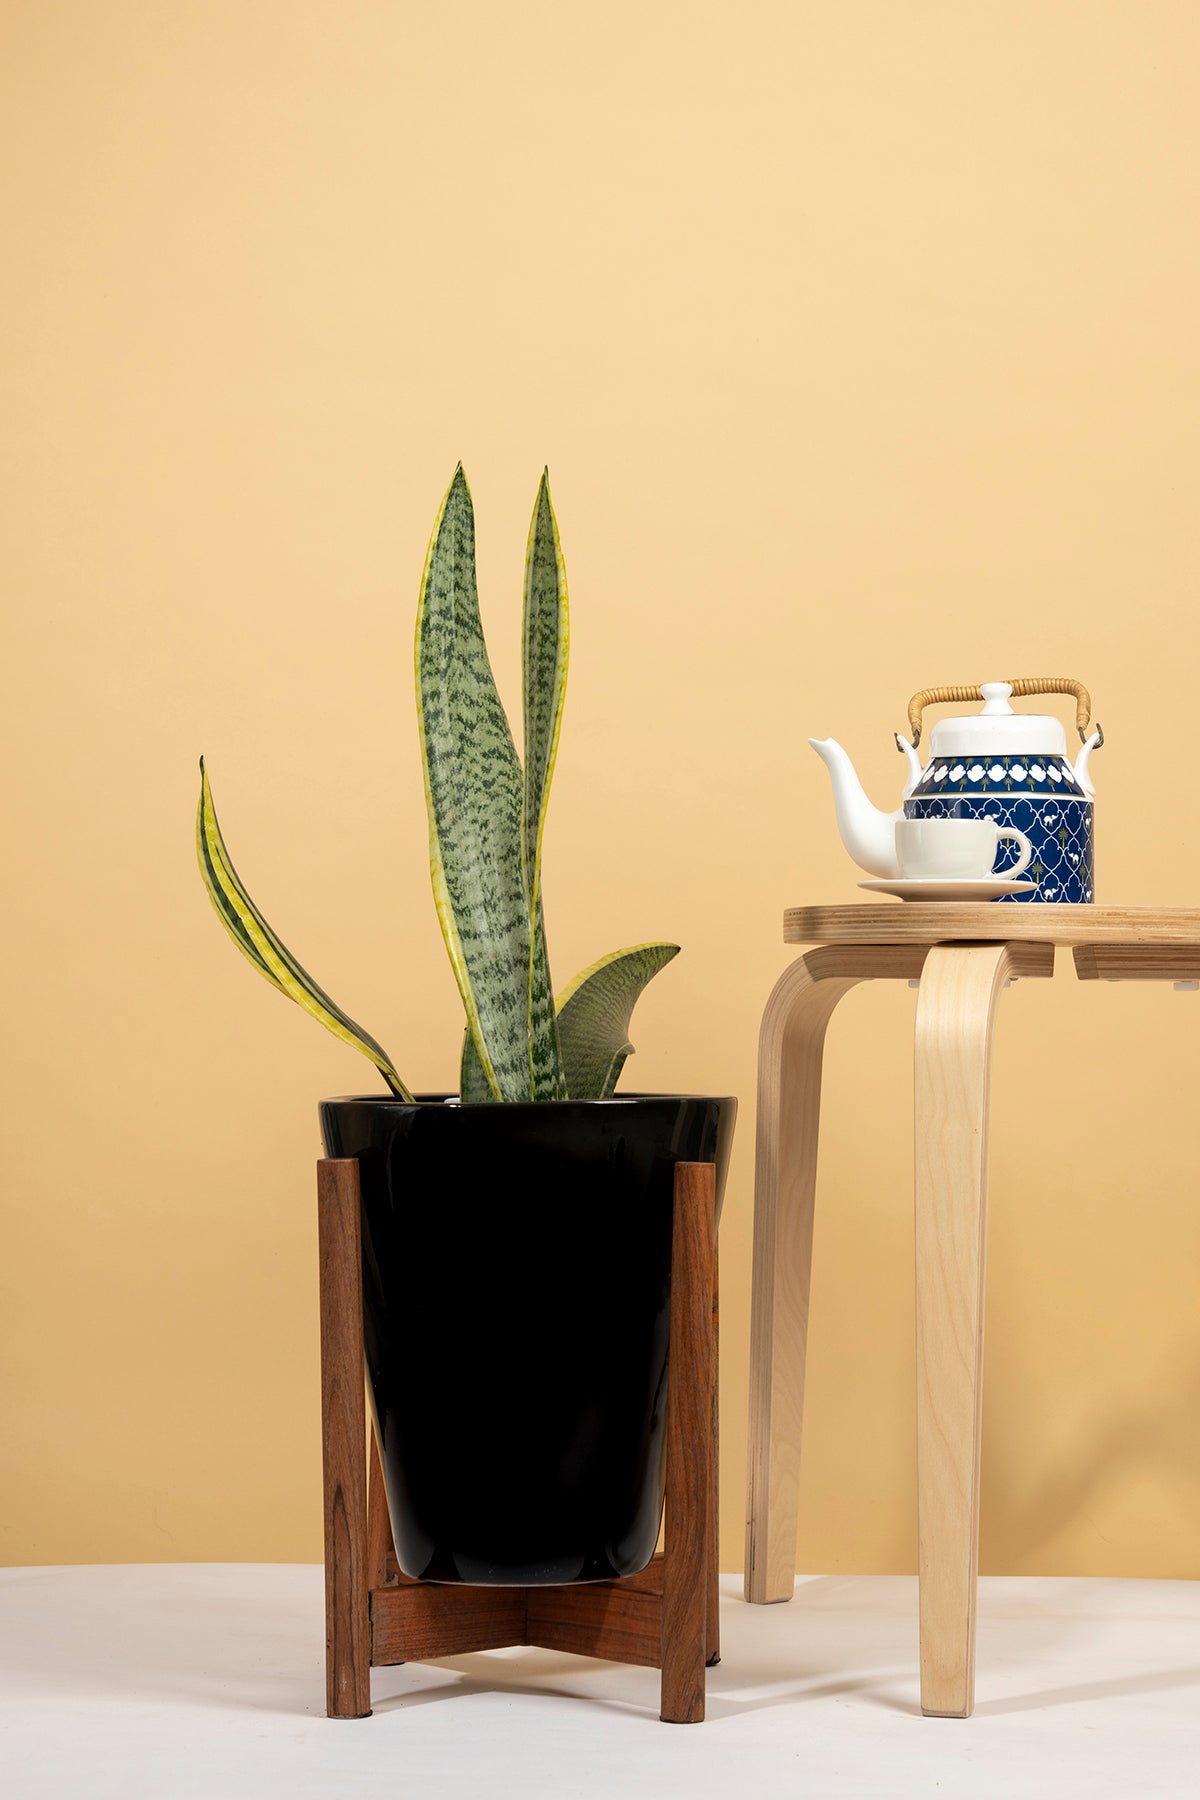 Medium Size Love Bite ceramic planter with wooden stand in Black color with snake plant in it.